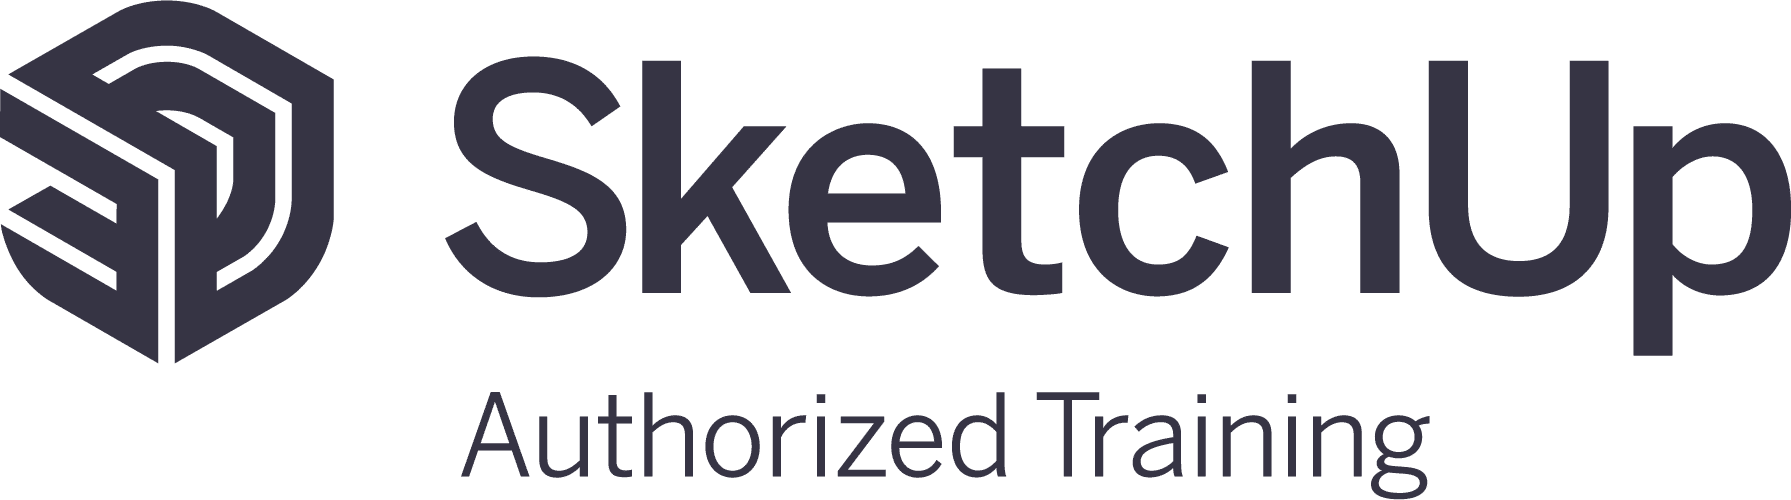 SketchUp Authorized Training Vertical DkGrey 240